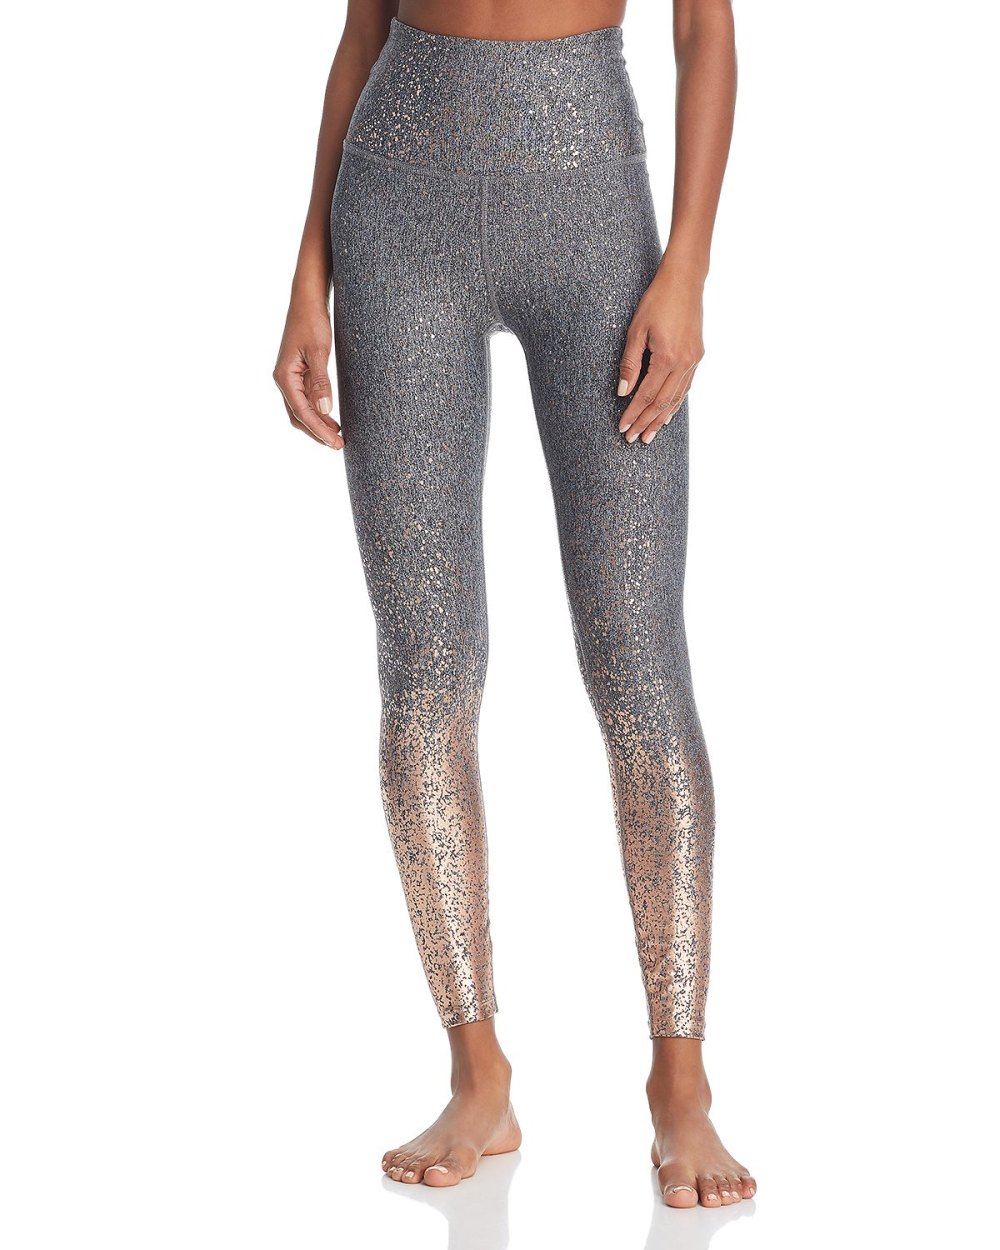 Bold and Bright Patterned Workout Pants - sparkleshinylove